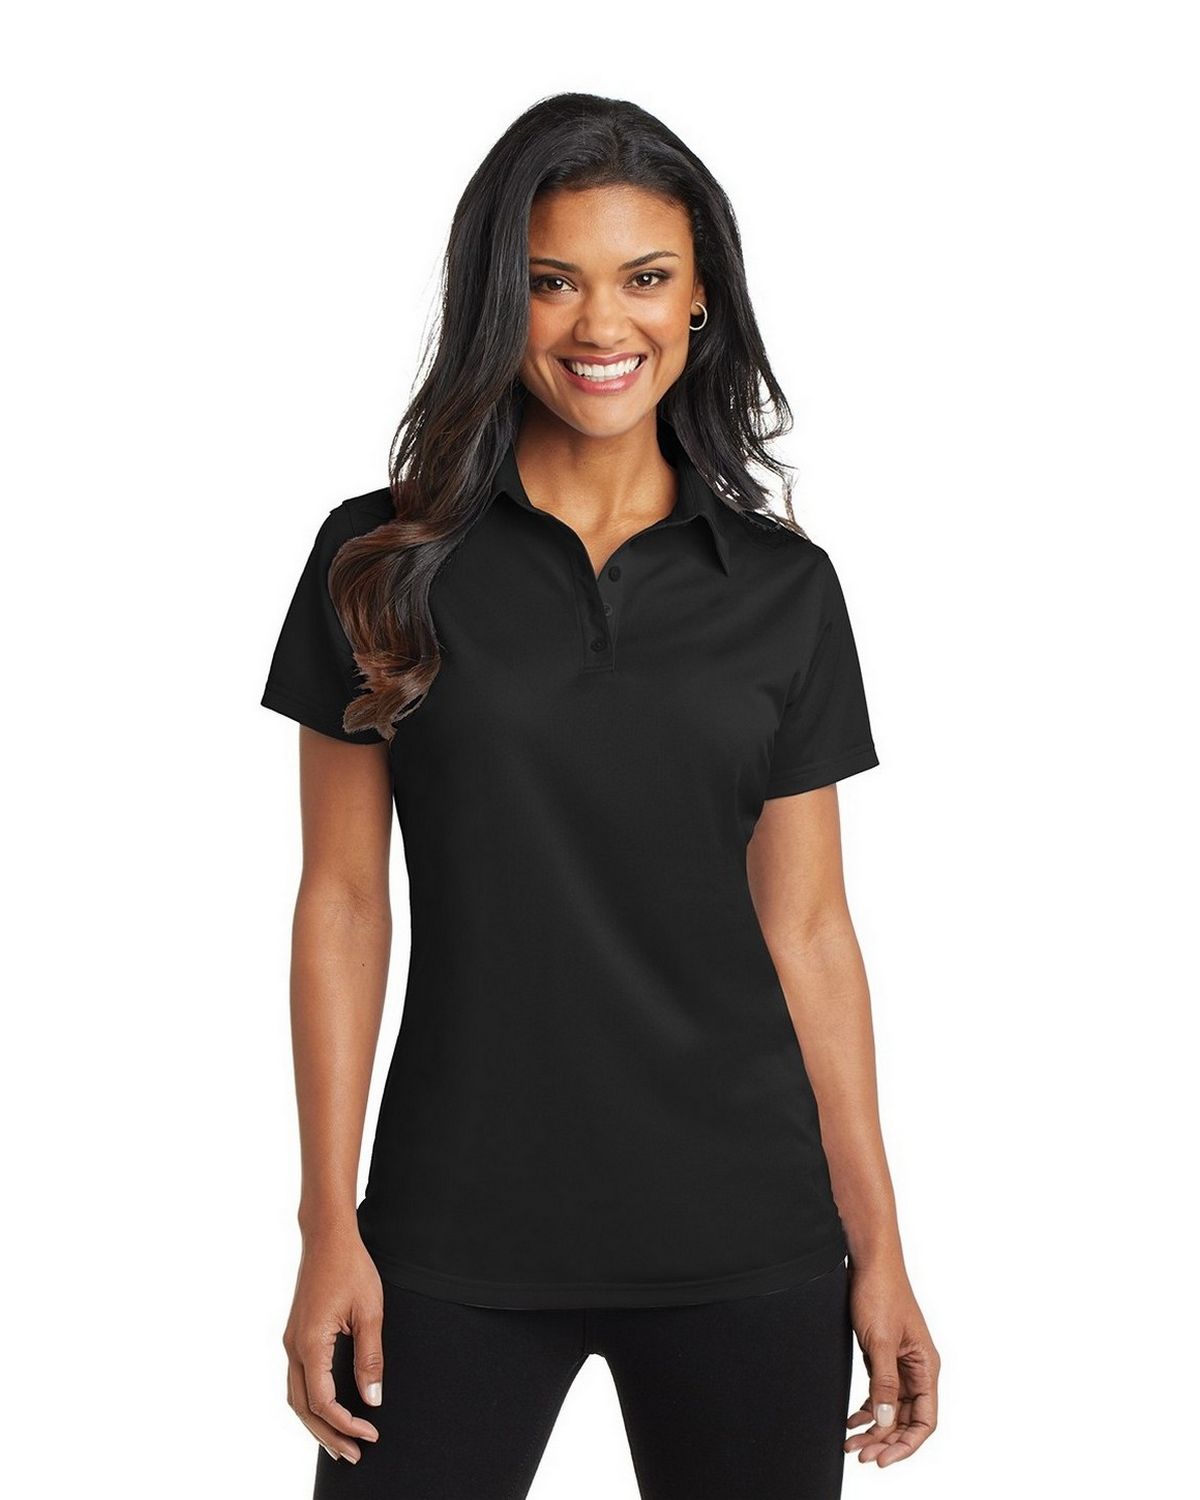 Size Chart for Port Authority L571 Ladies Dimension Polo Shirt